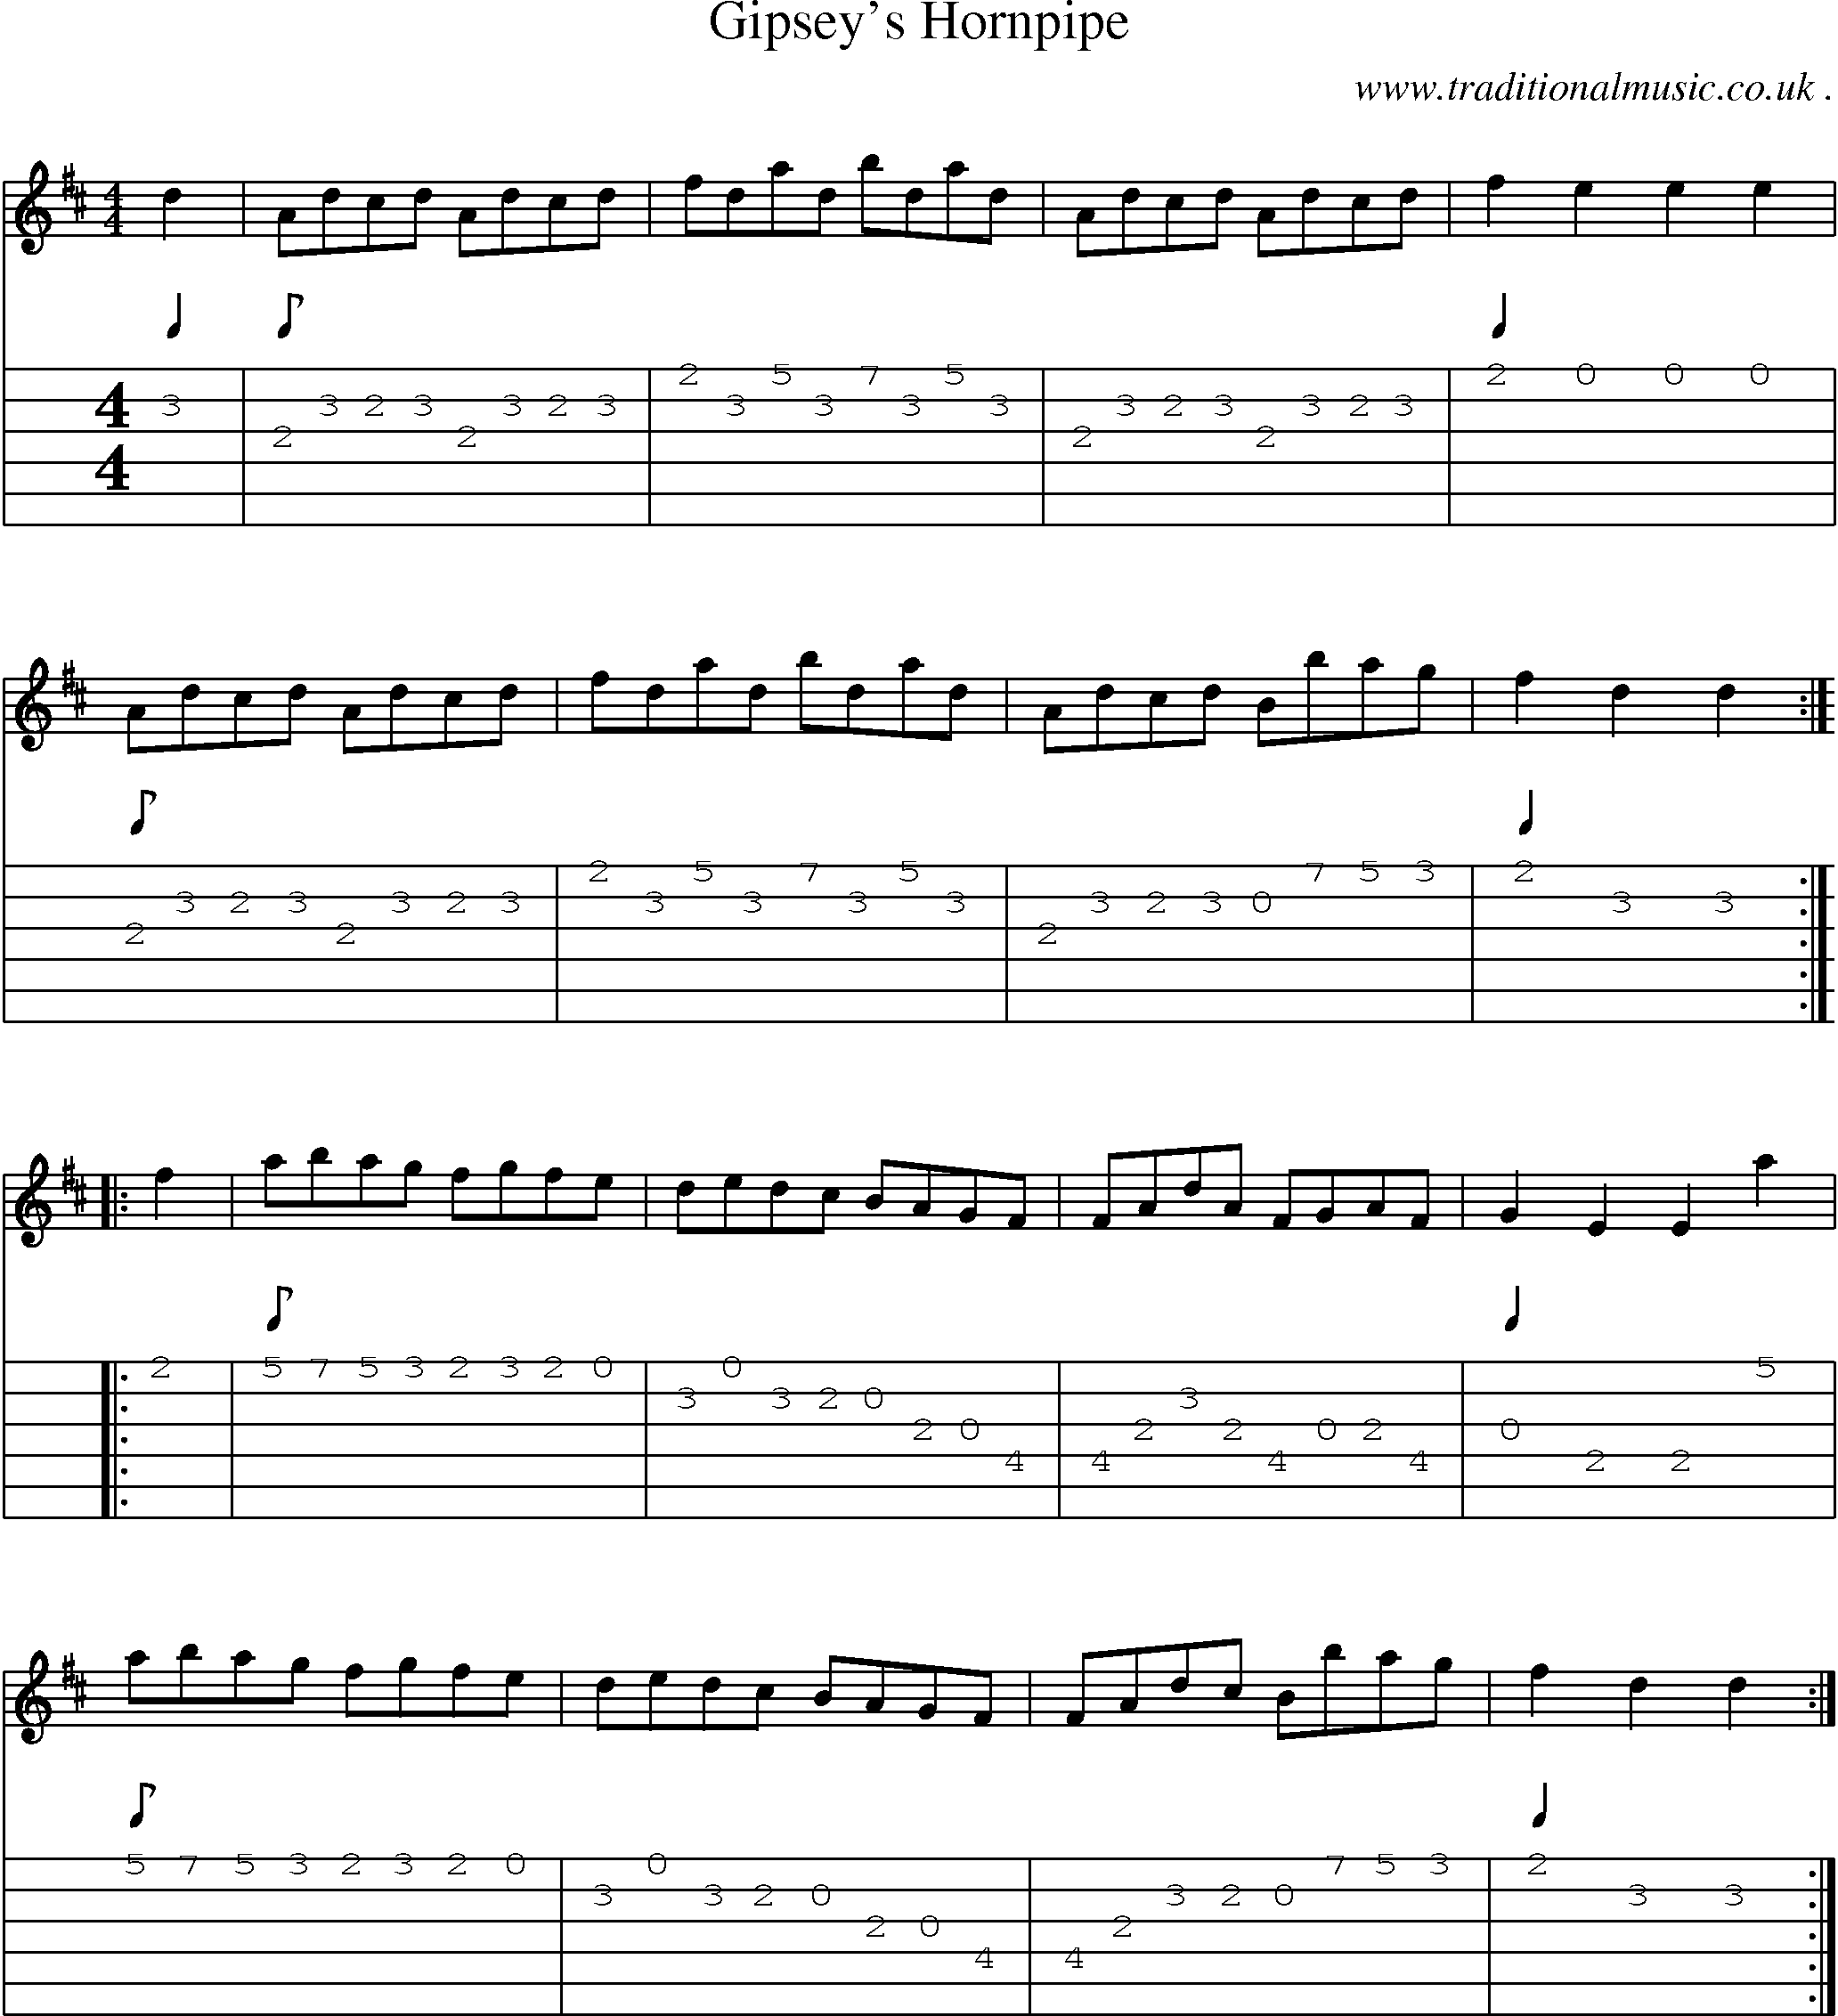 Sheet-Music and Guitar Tabs for Gipseys Hornpipe